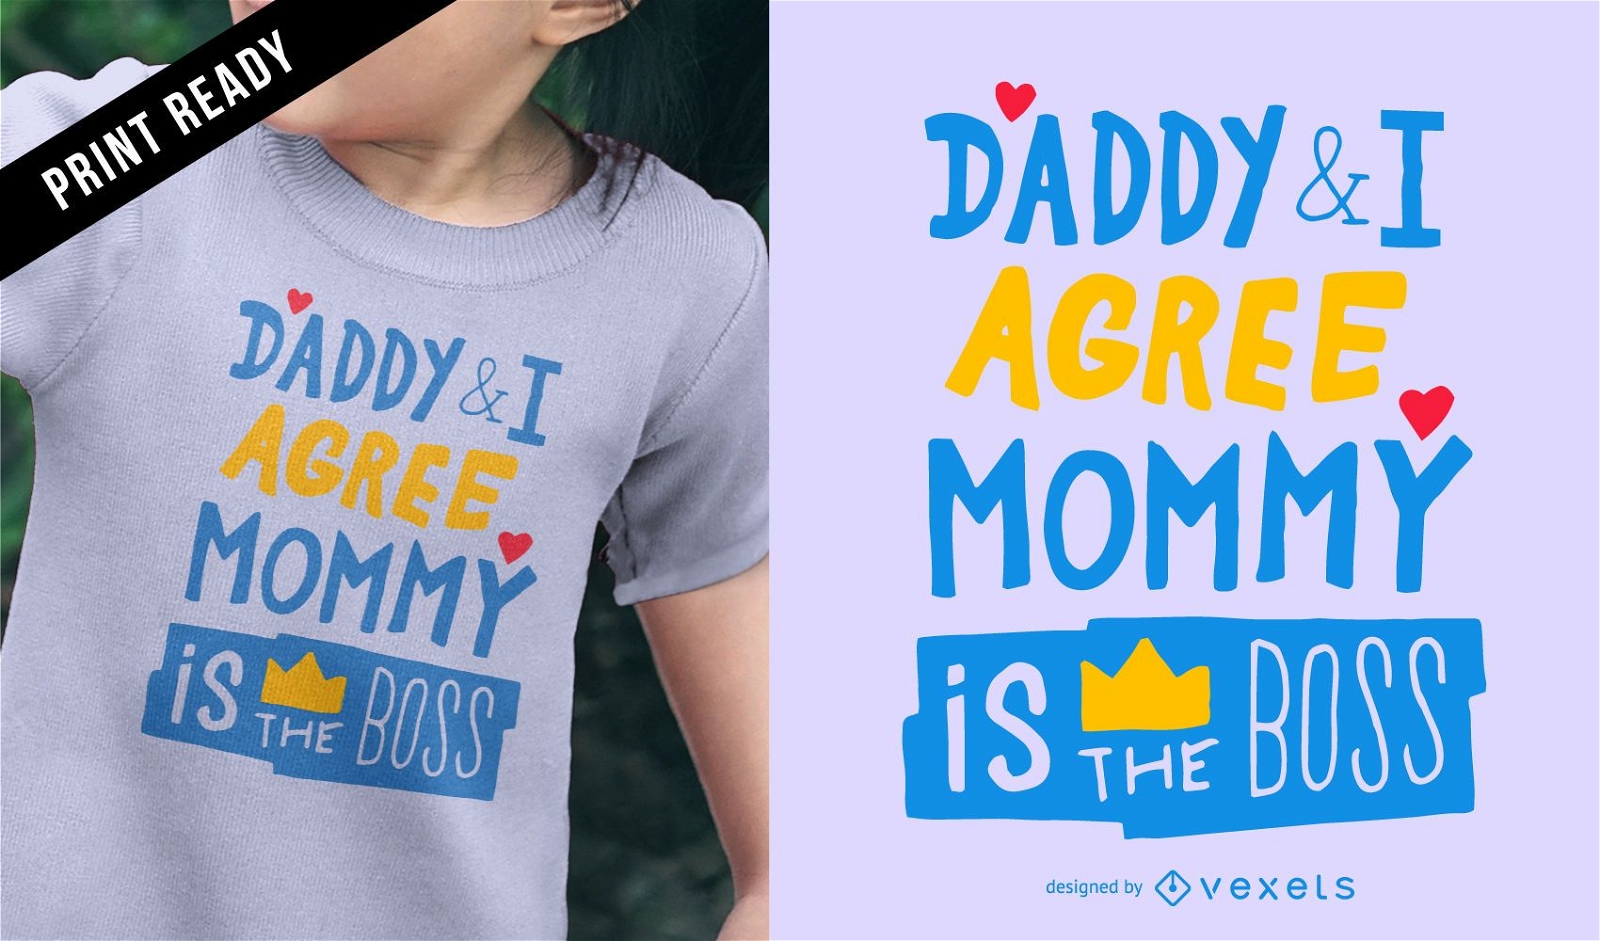 Mommy is the boss t-shirt design